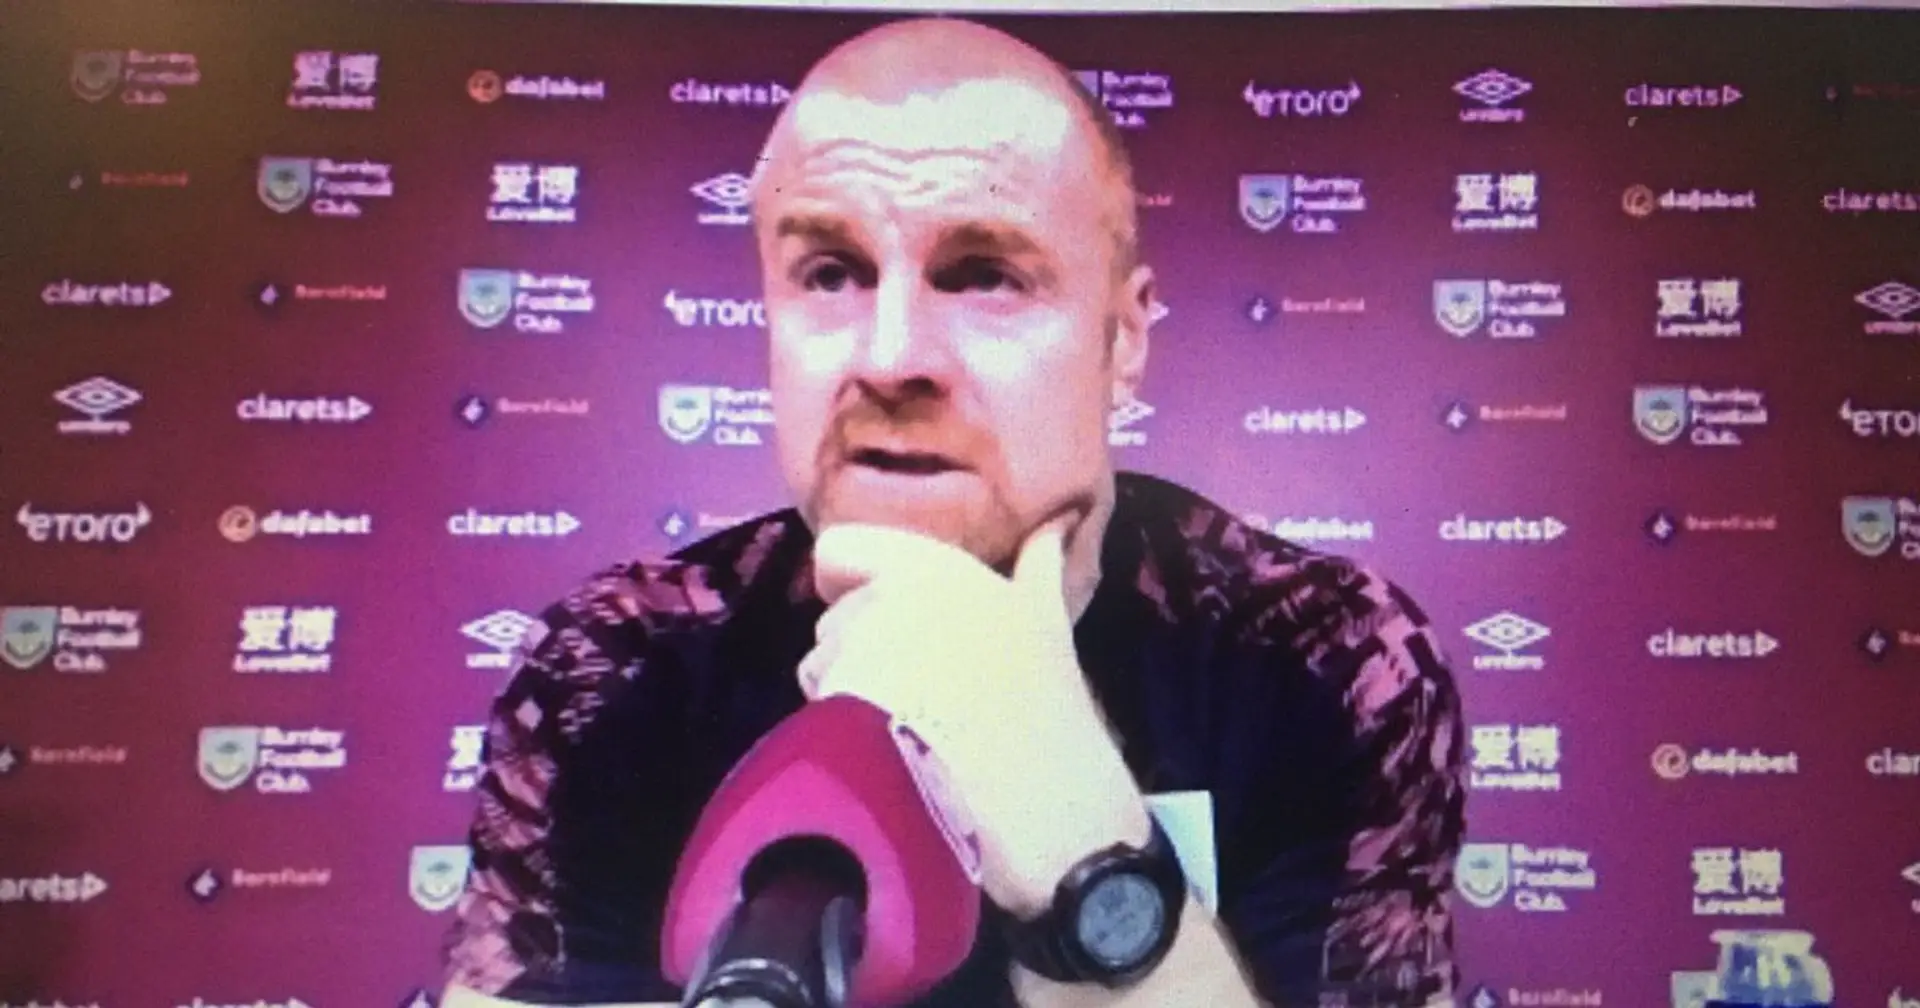 Sean Dyche confirms 'couple of' coronavirus cases at Burnley ahead of Man United clash